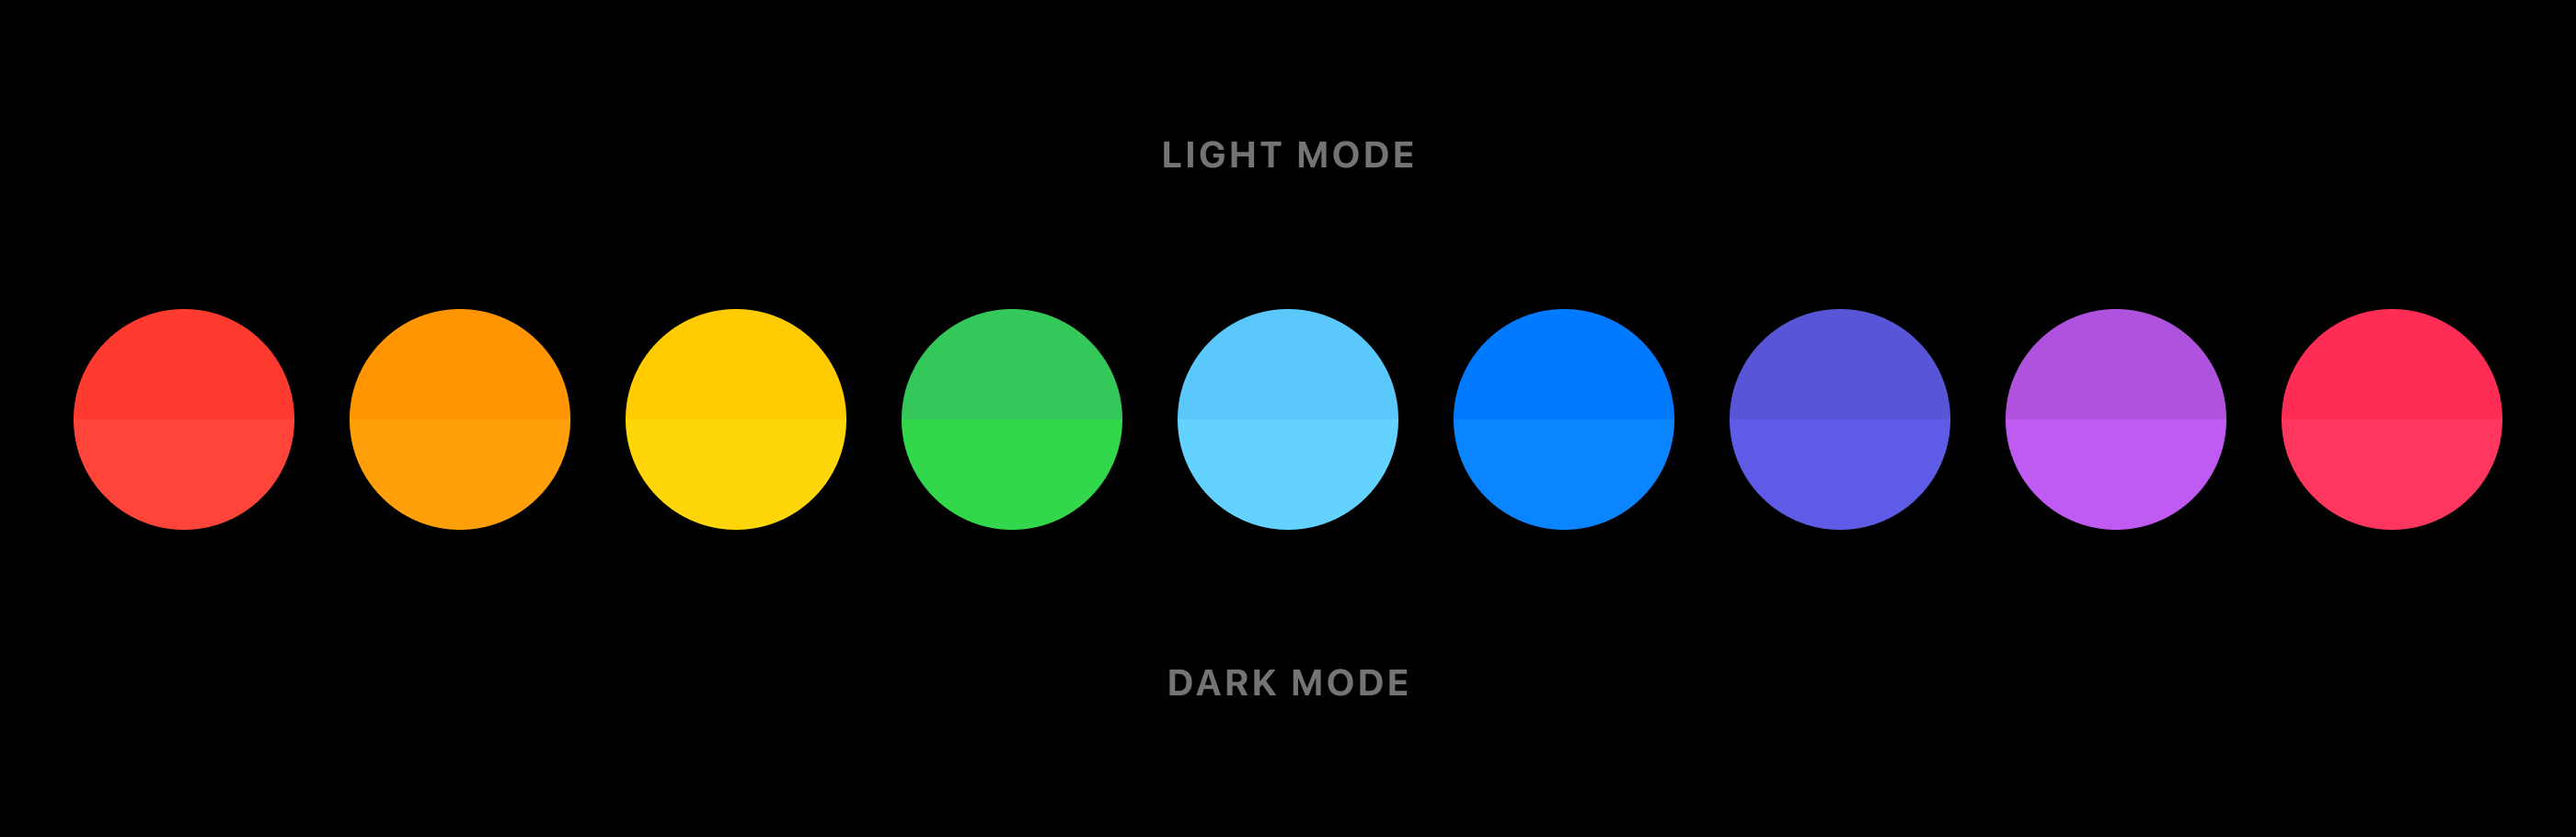 Designing A Dark Mode For Your Ios App The Ultimate Guide By Chethan Kvs Prototypr